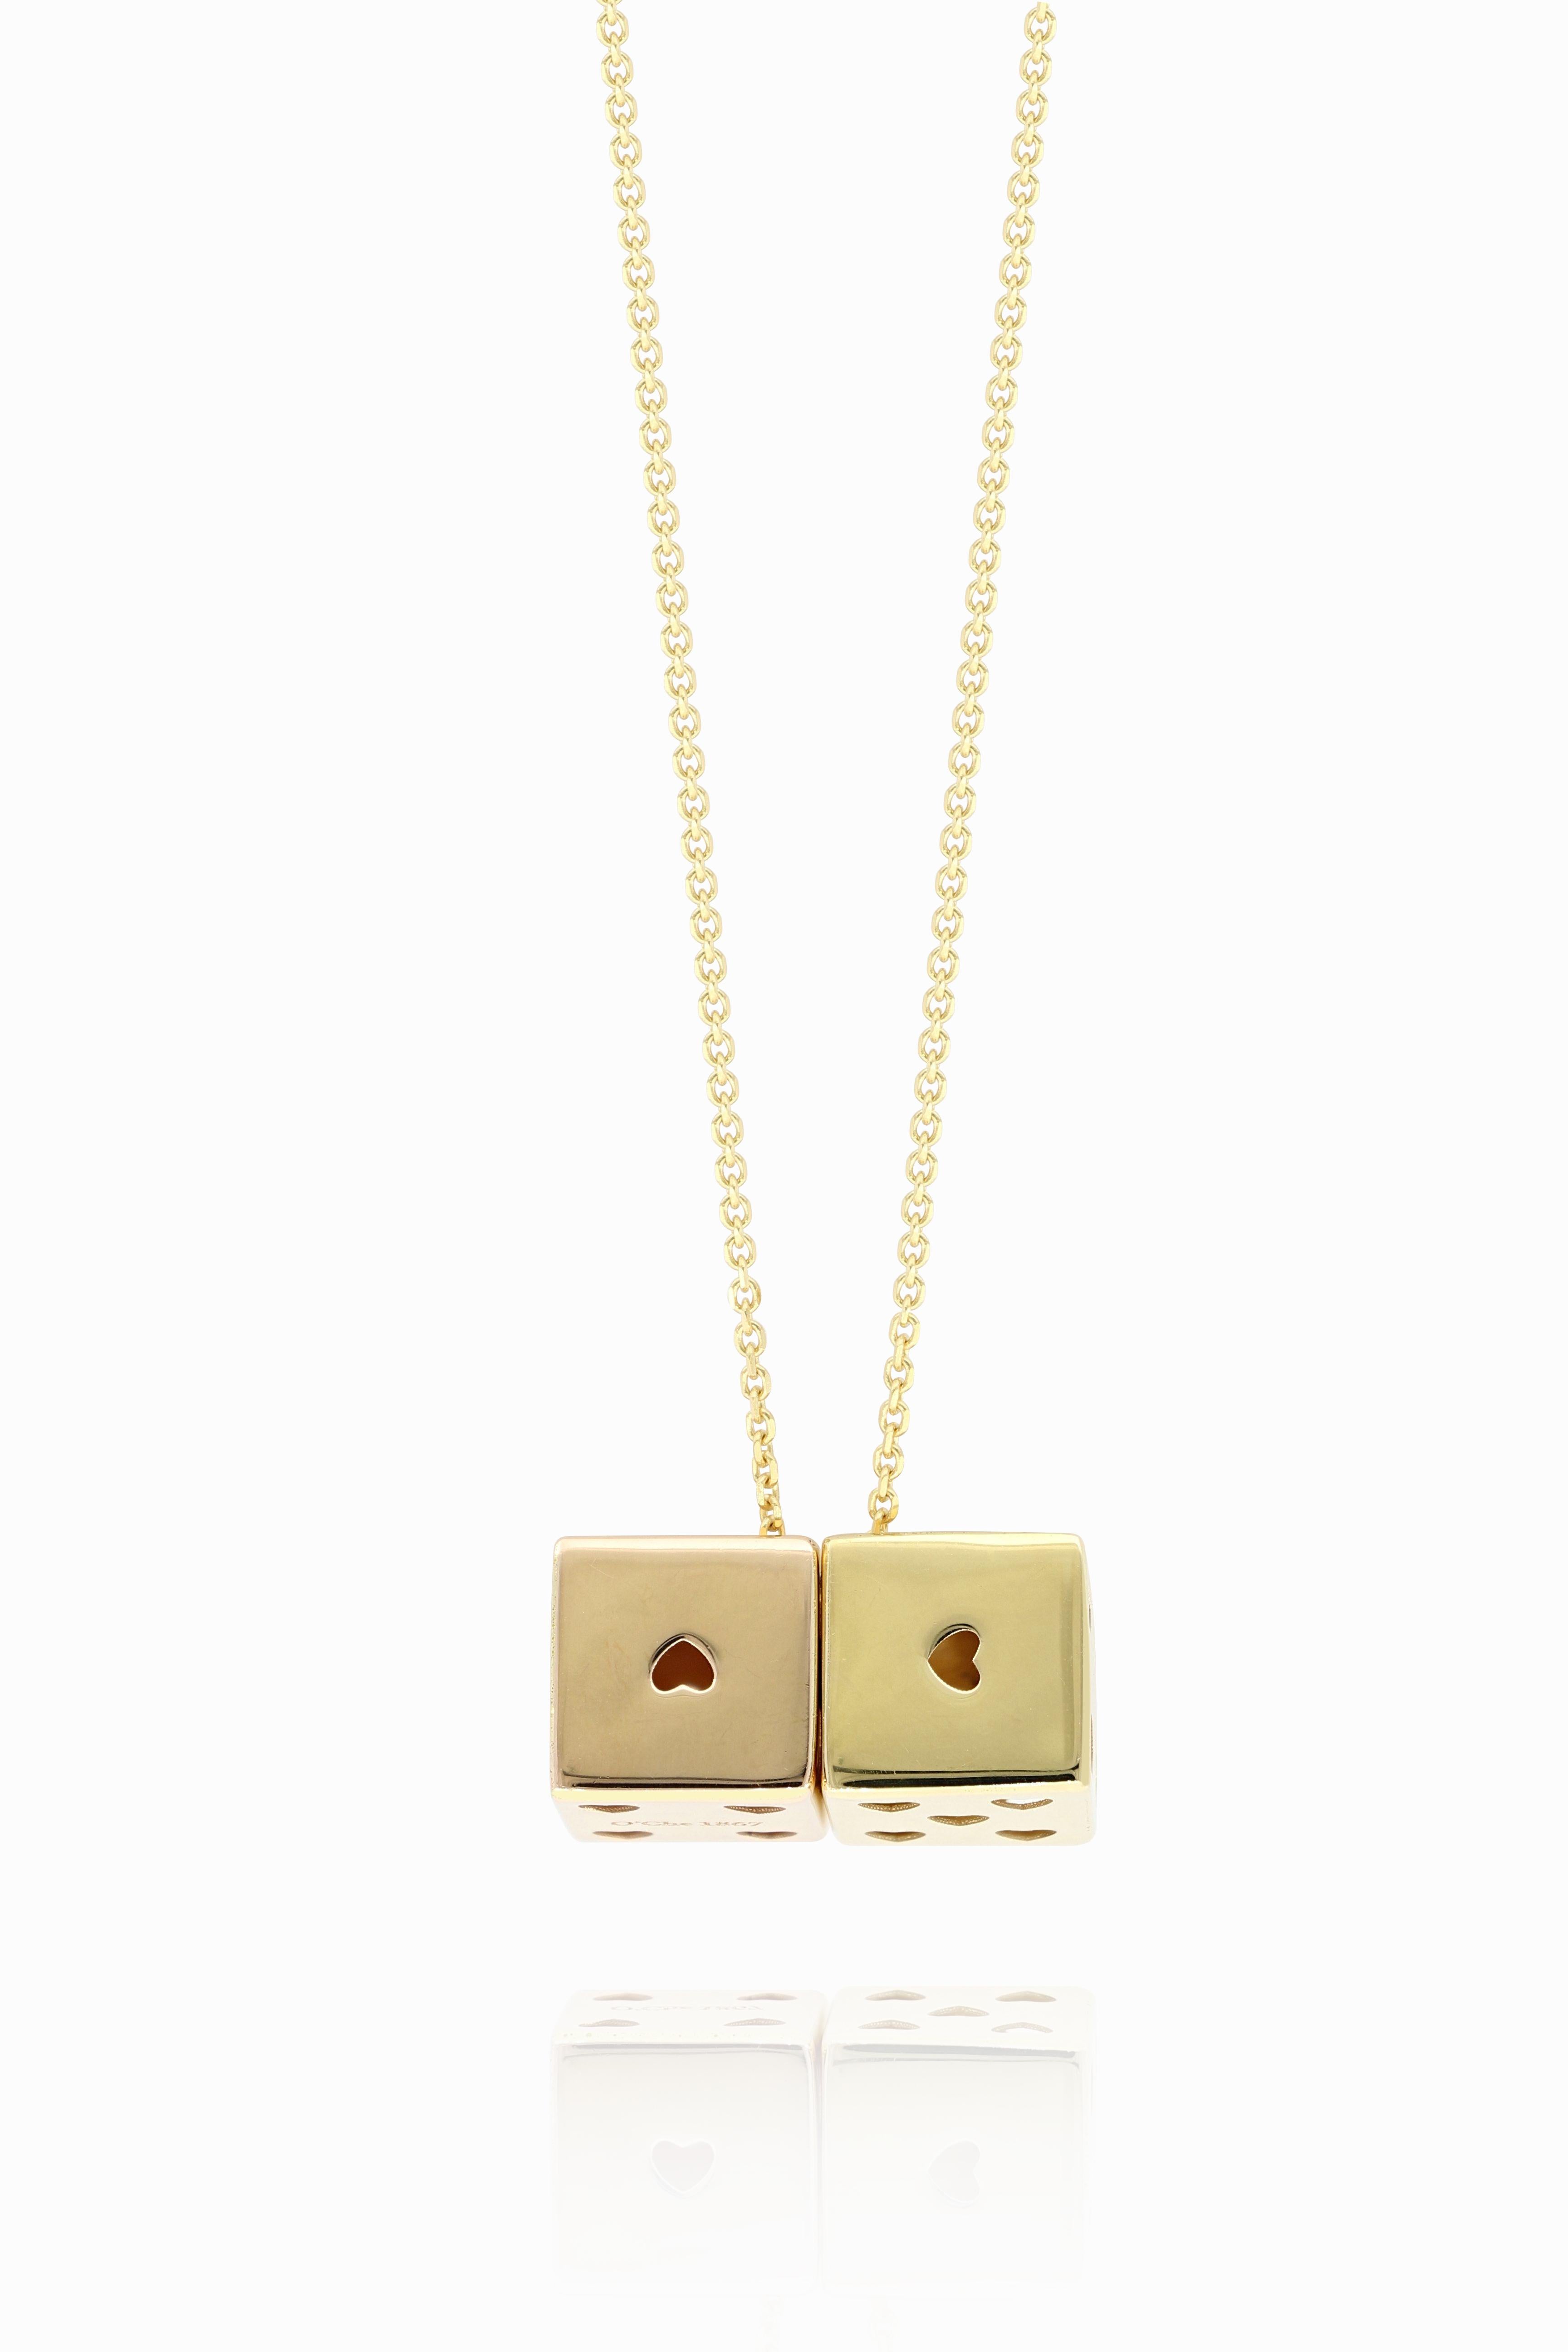 This unique 18K gold pendant necklace, designed and made in Italy,  is in the form of two dice cubes in yellow gold and rose gold. It is very trandy and stylish, can be matched with jeans and everyday wear.

The company was founded one and a half